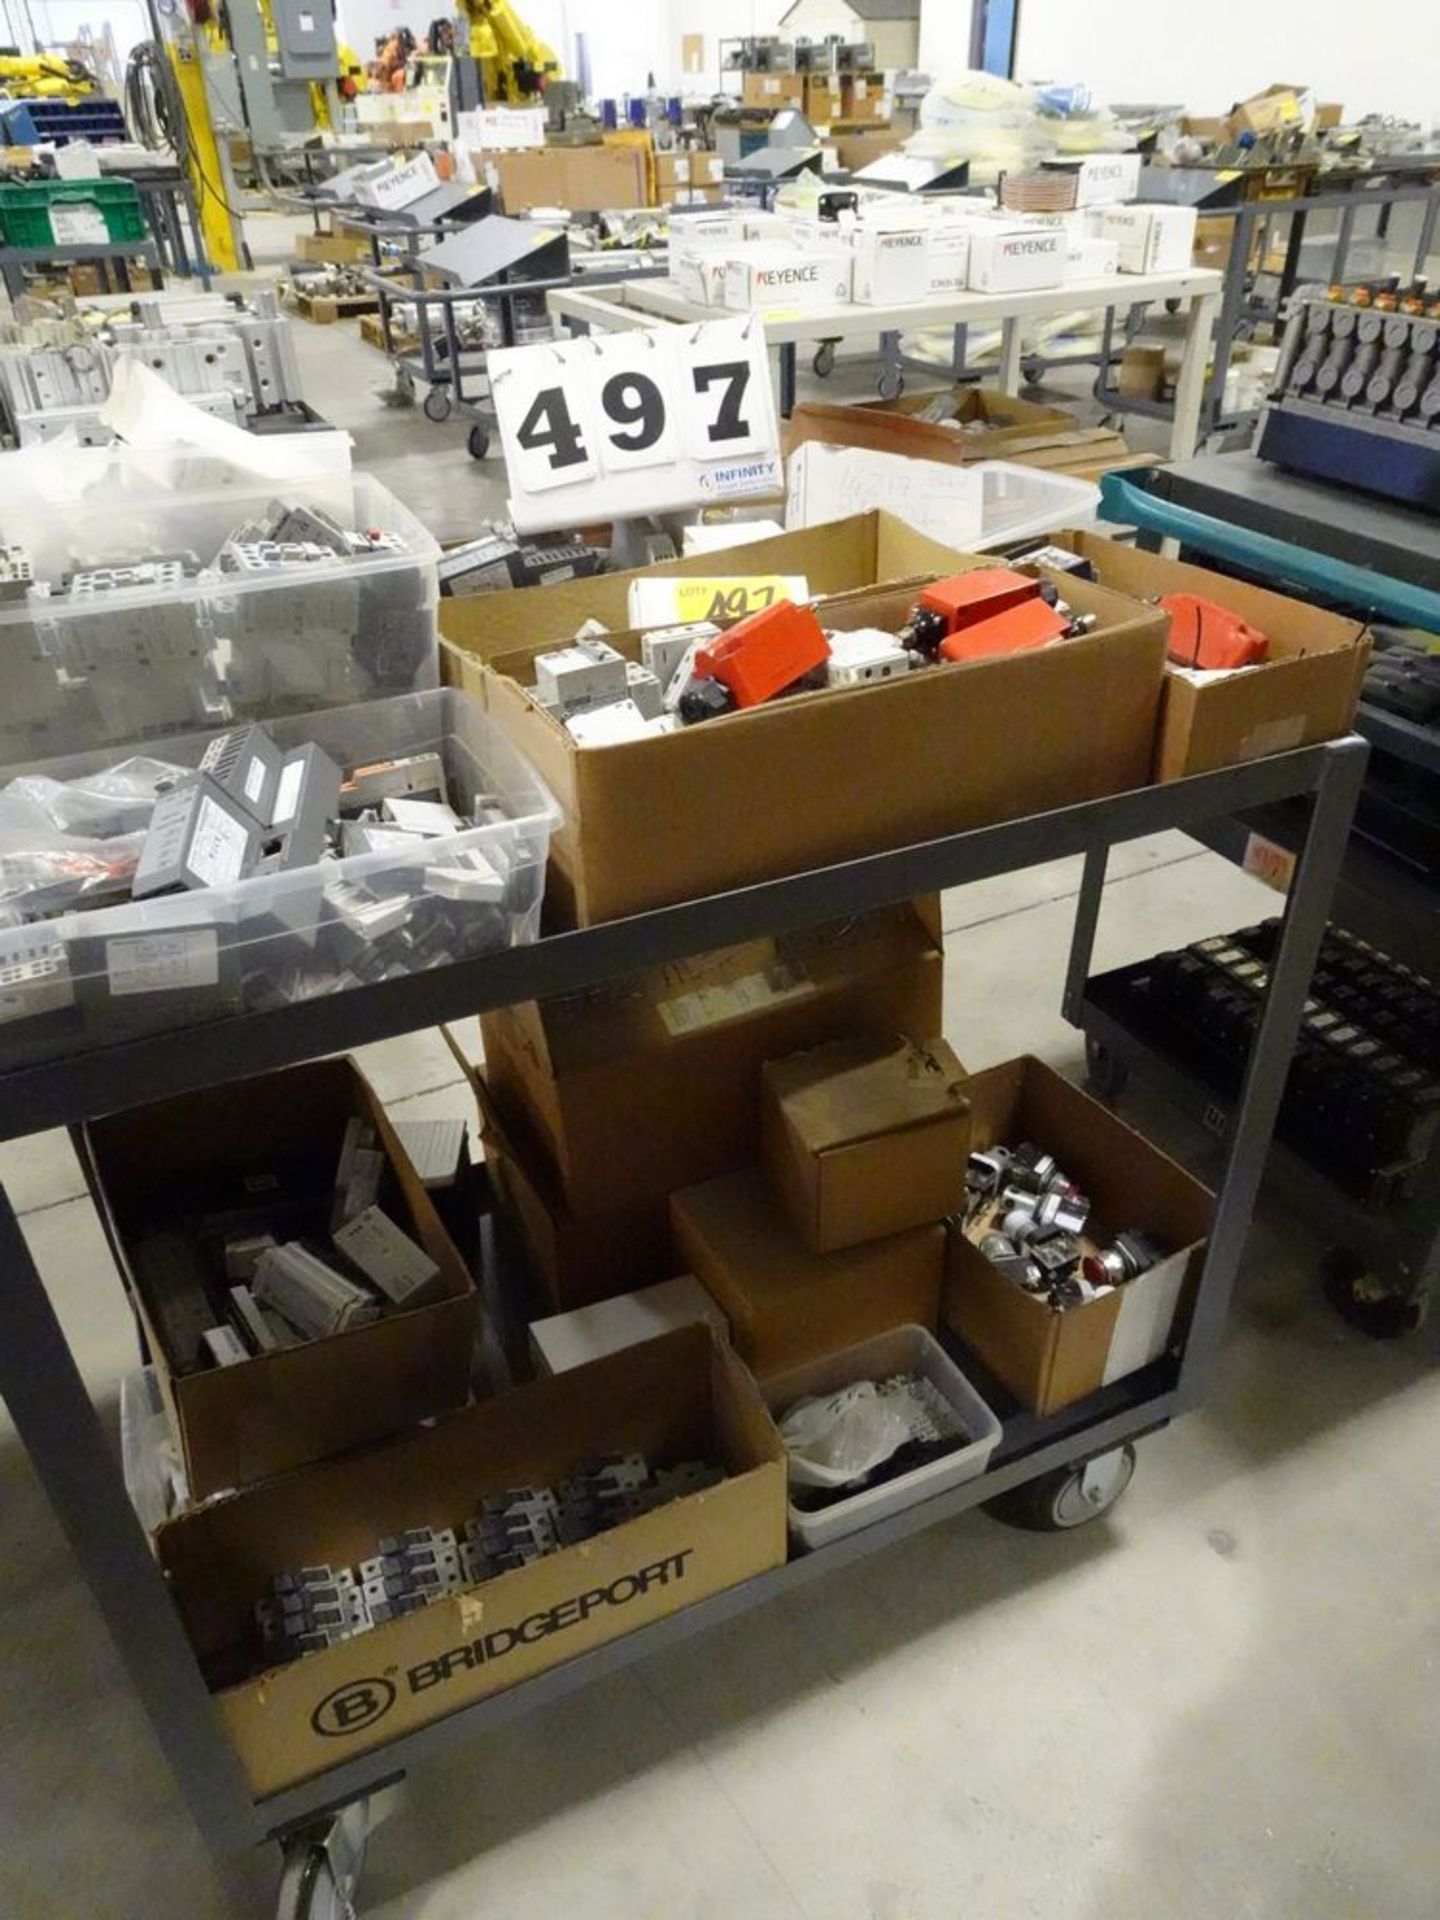 ASSORTED PRODUCT, SWITCHES, RELAYS, VALVES, ETC.